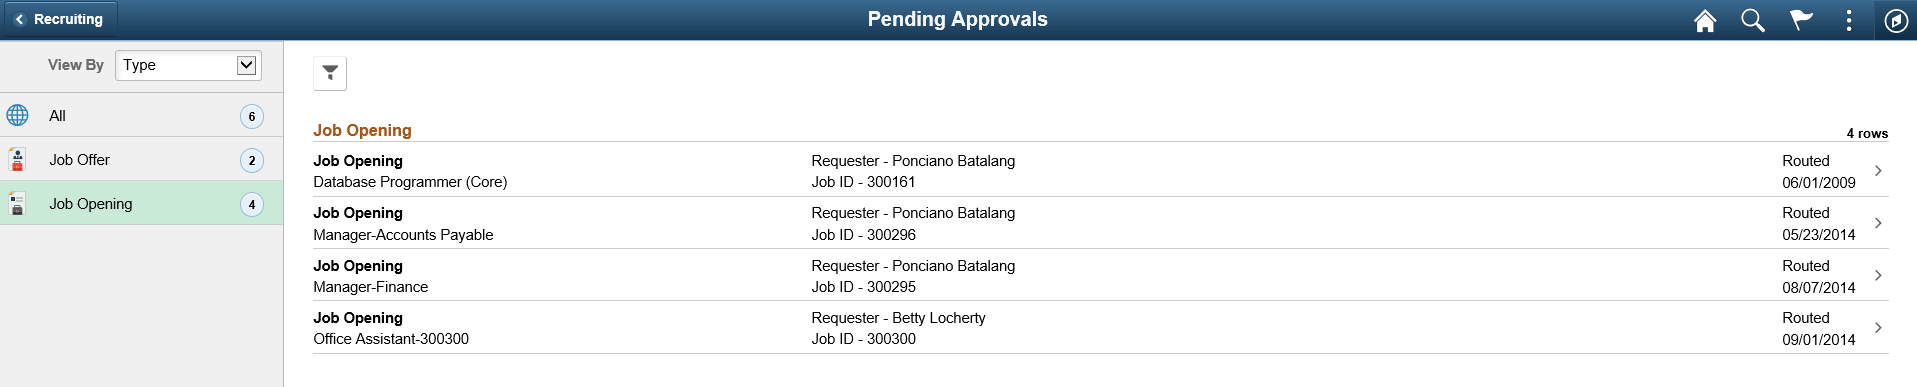 Pending Approvals - Job Opening category